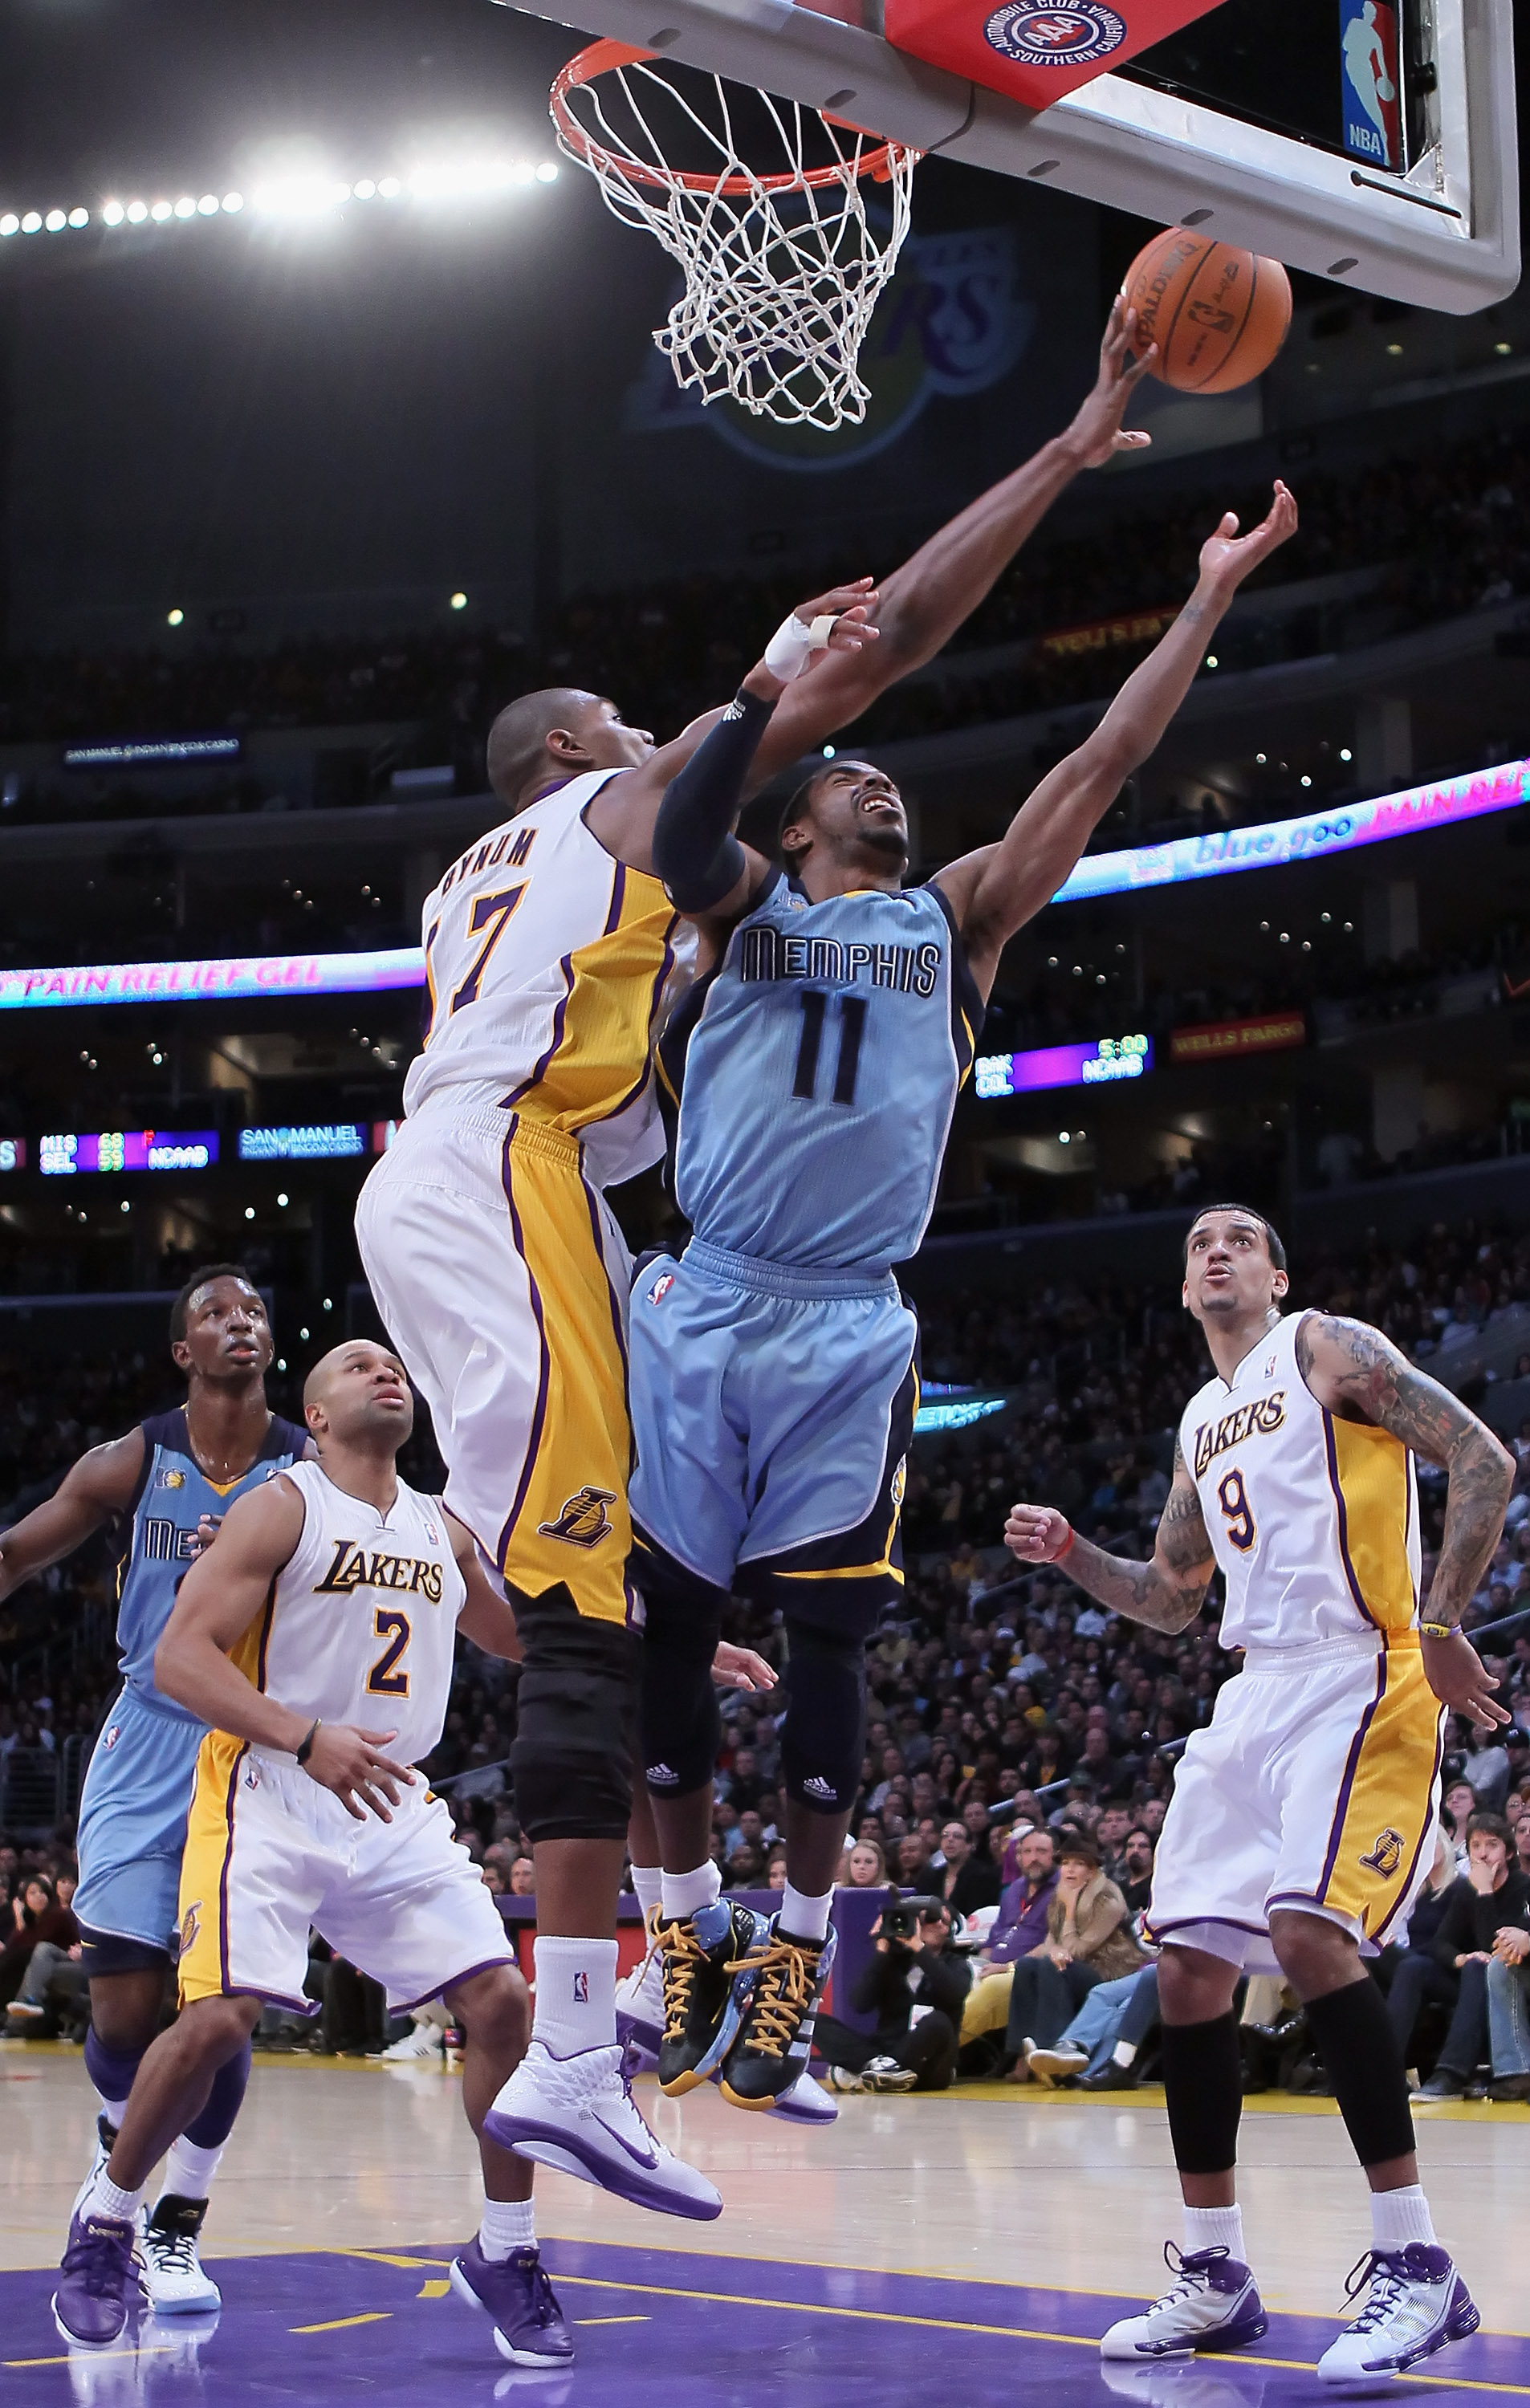 LOS ANGELES, CA - JANUARY 02:  Andrew Bynum #17 of the Los Angeles Lakers blocks a shot from Mike Conley #11 of the Memphis Grizzlies during the first half at Staples Center on January 2, 2011 in Los Angeles, California. NOTE TO USER: User expressly ackno